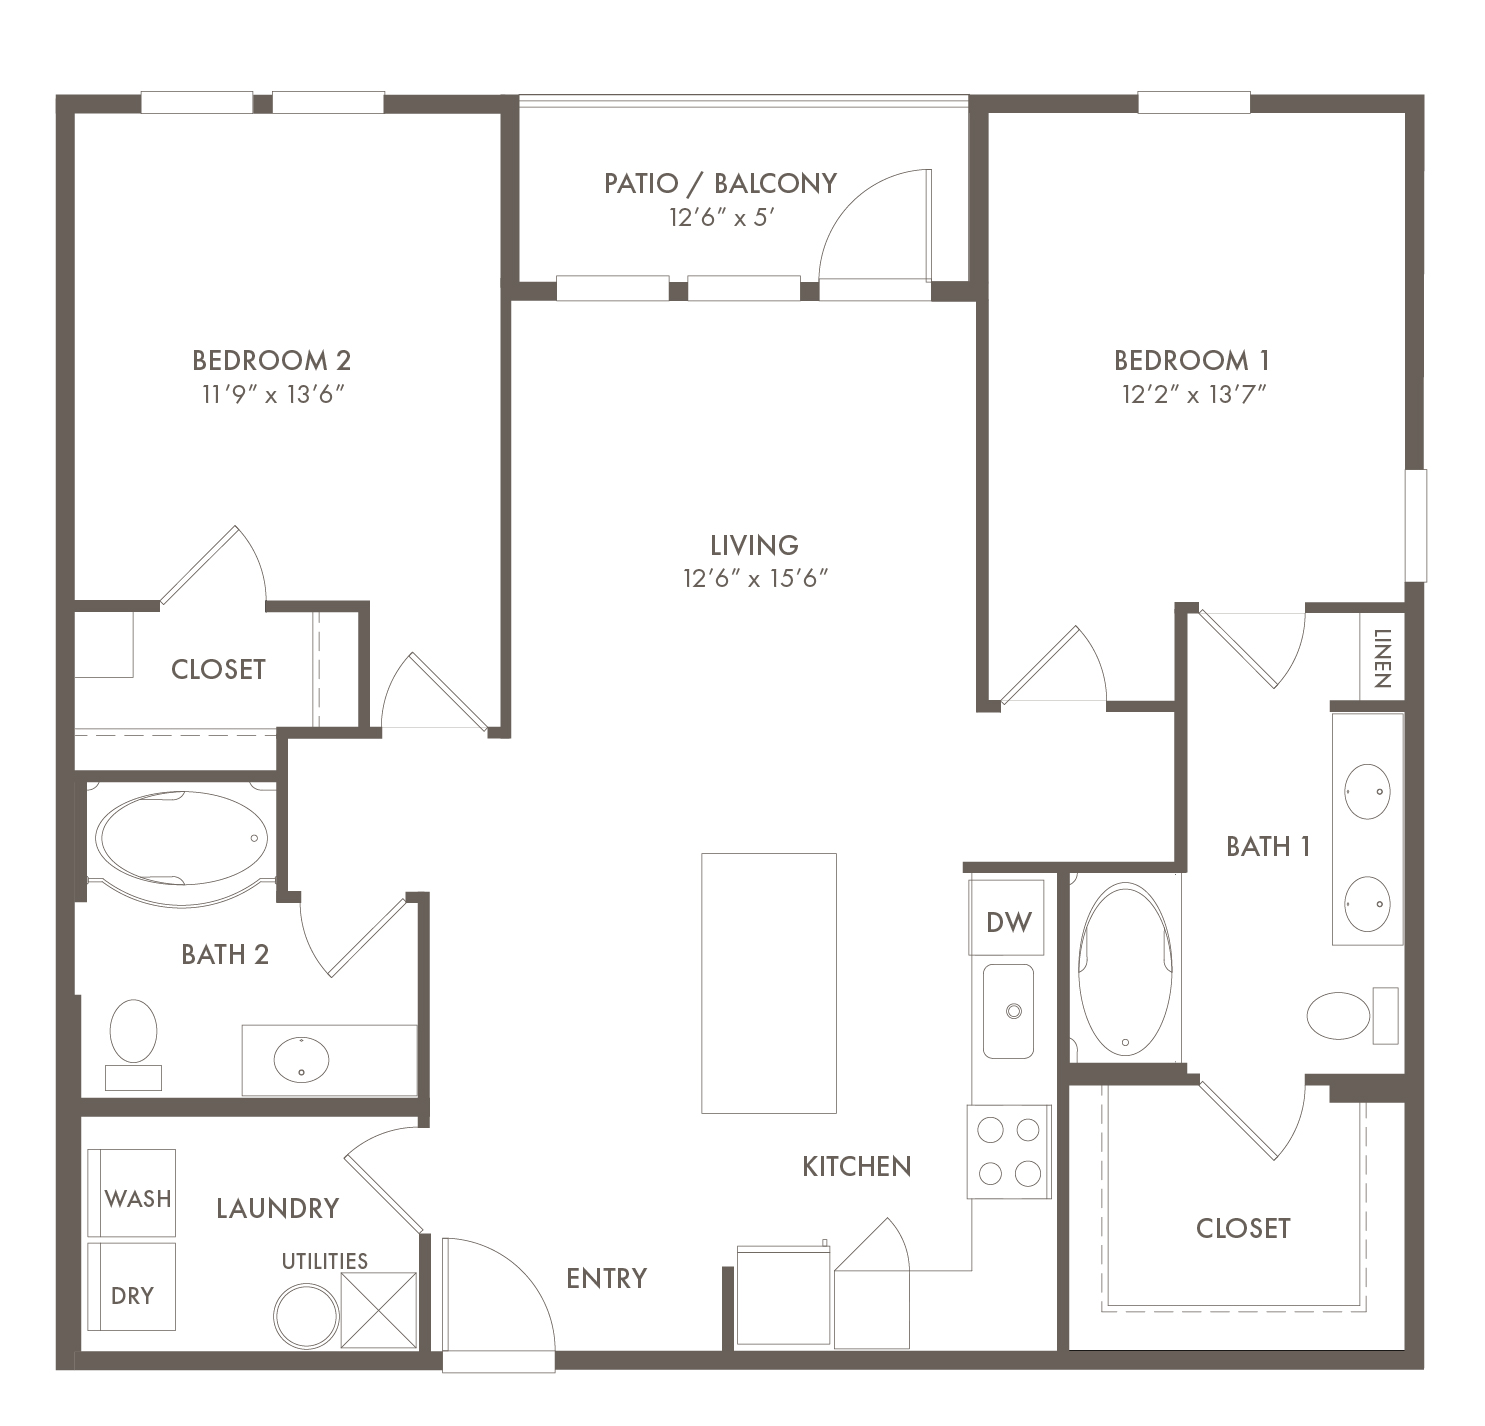 A B1C unit with 2 Bedrooms and 2 Bathrooms with area of 1,176 sq. ft